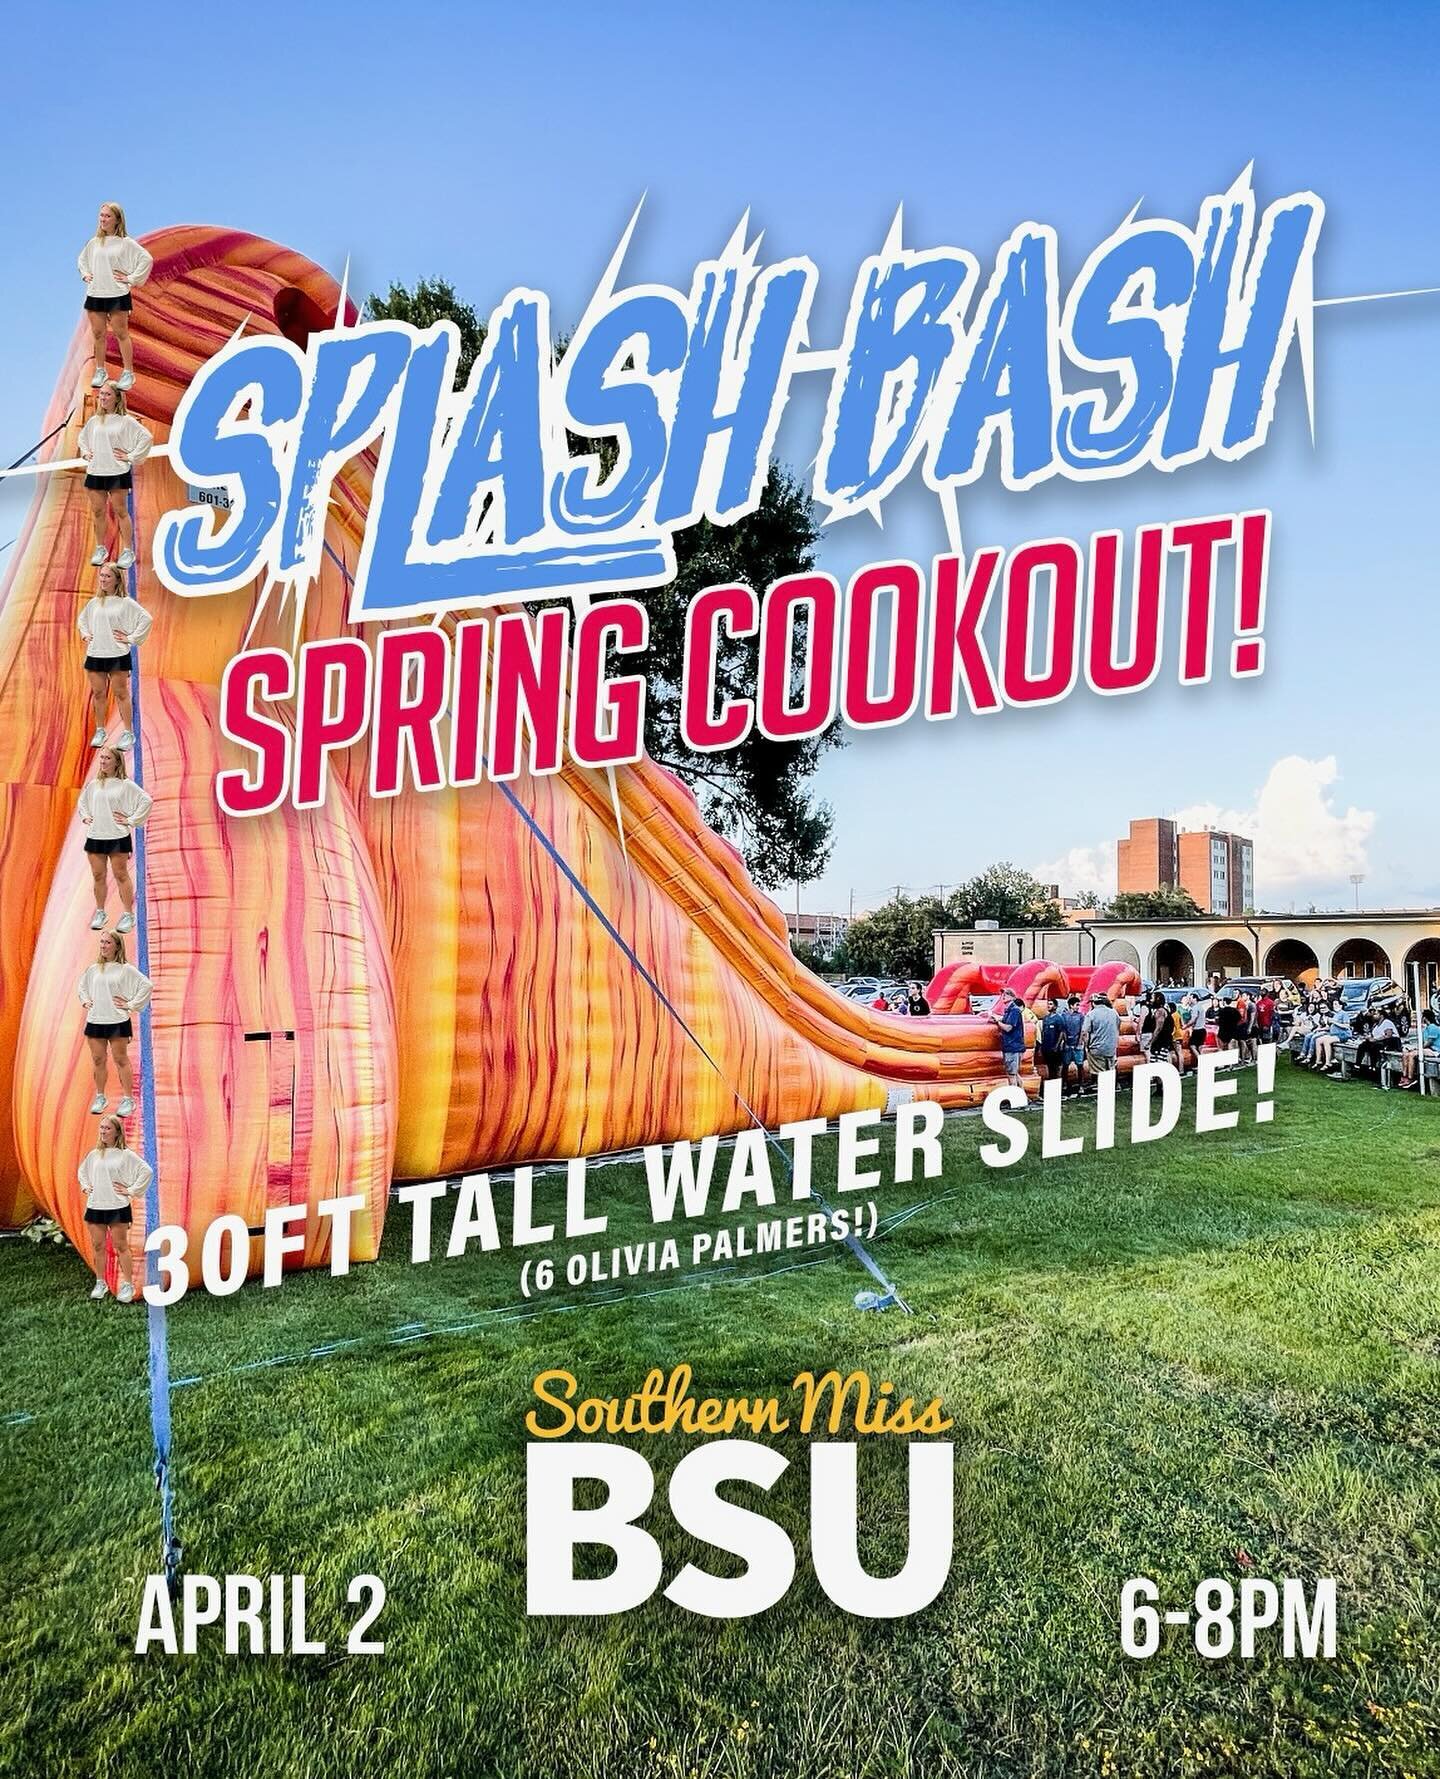 TOMORROW NIGHT (Tues, April 2) we&rsquo;re having a spring cookout in the BSU backyard!

We&rsquo;ll officially start at 6pm, but feel free to come early if you want to get some slides in on the *tallest inflatable slide in Mississippi! (30ft = 6x @o